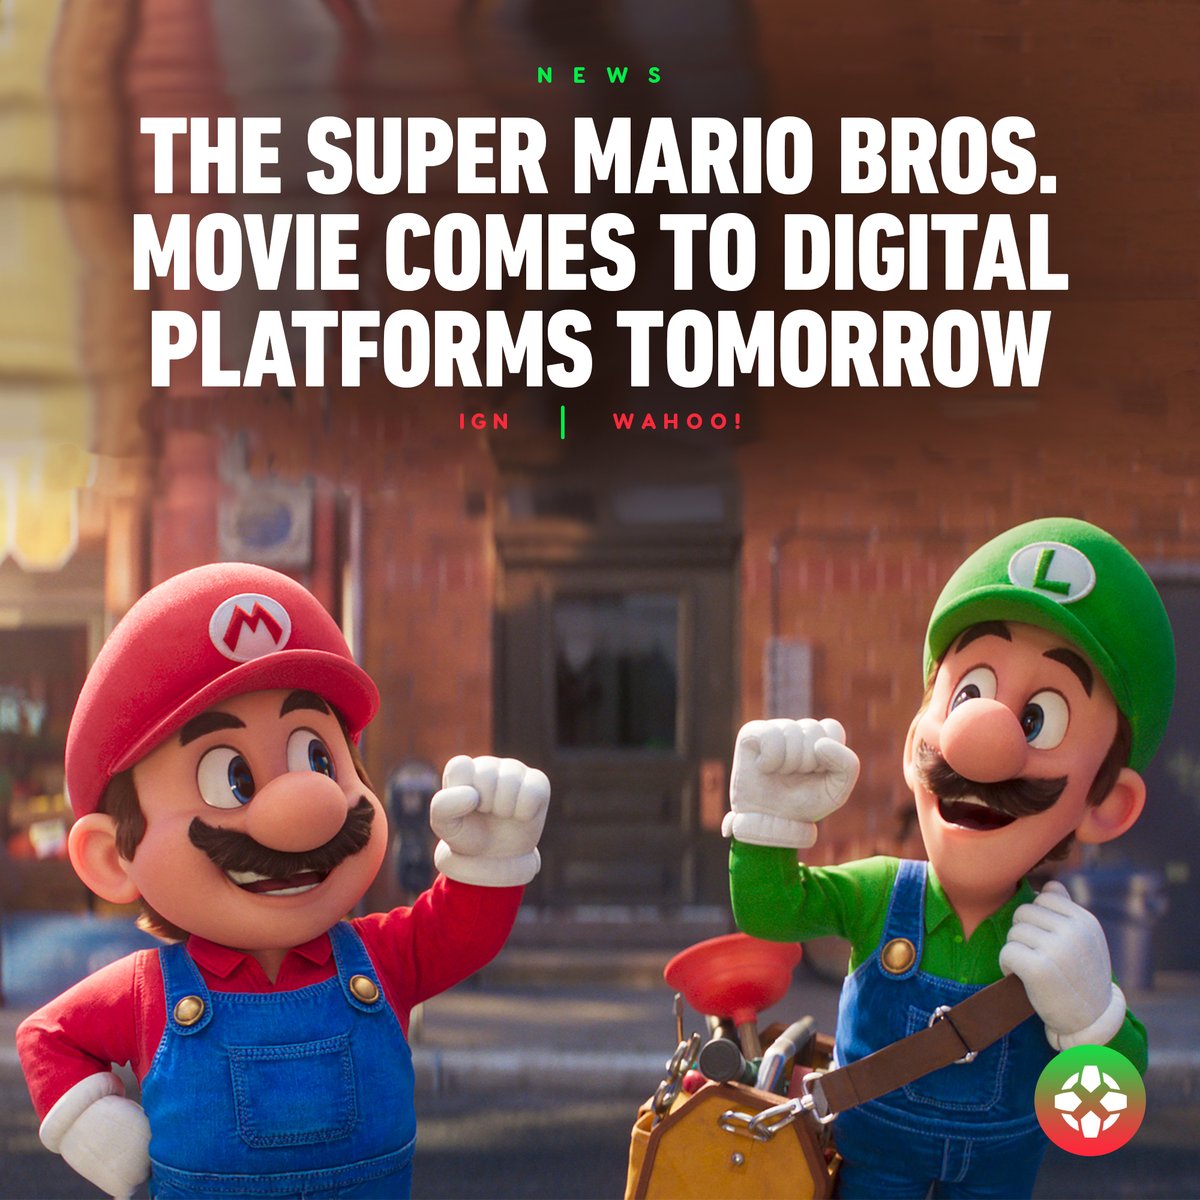 The Super Mario Bros: Here's how to stream 'The Super Mario Bros' on  digital platforms - The Economic Times